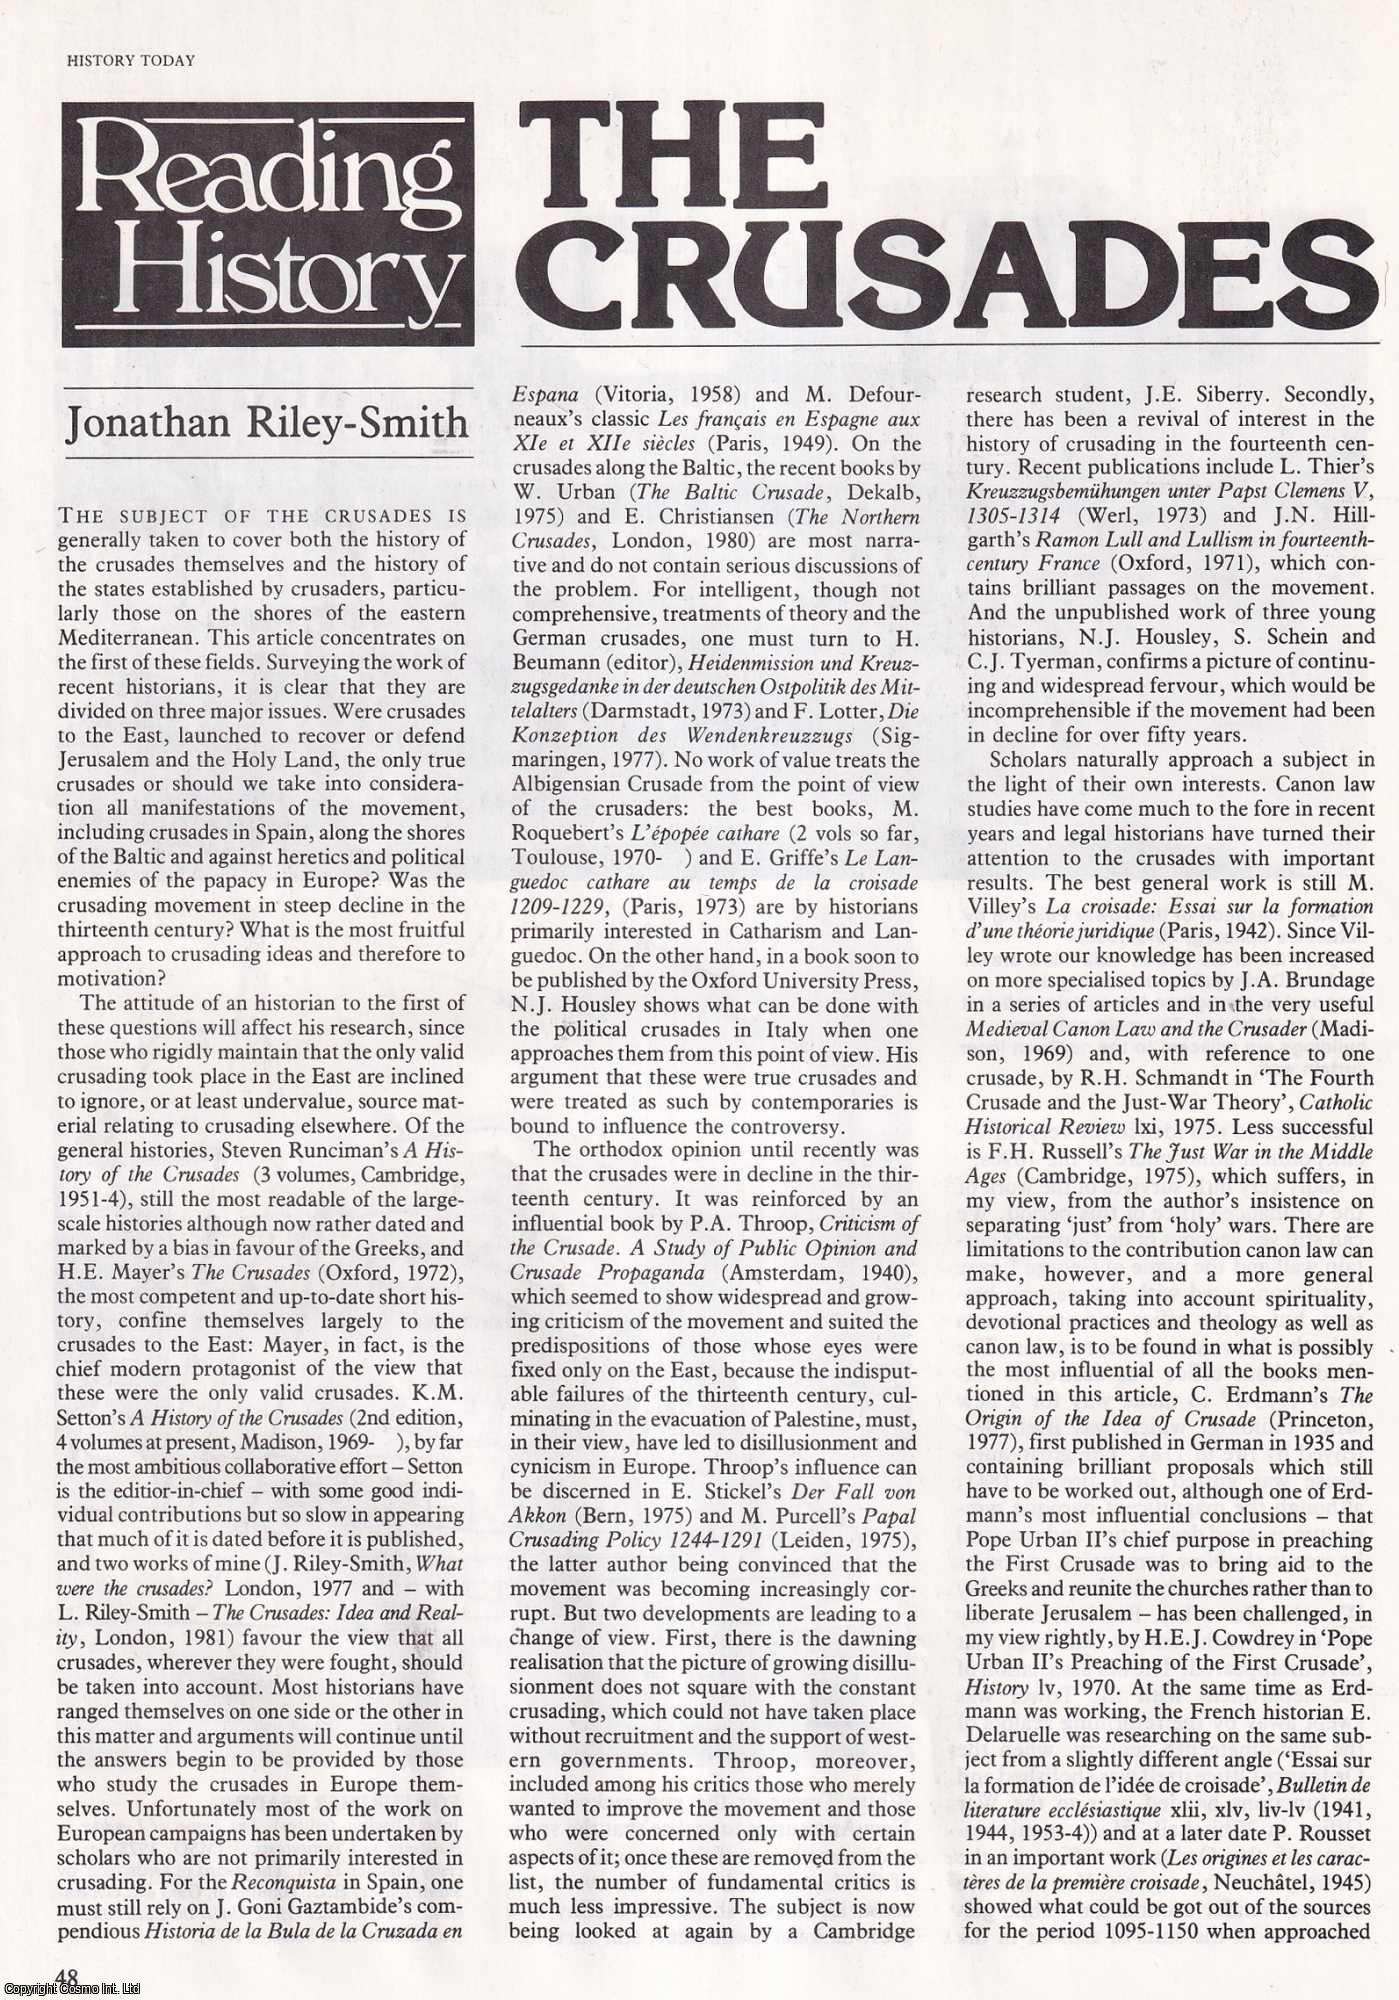 Jonathan Riley-Smith - The Crusades. An original article from History Today 1982.